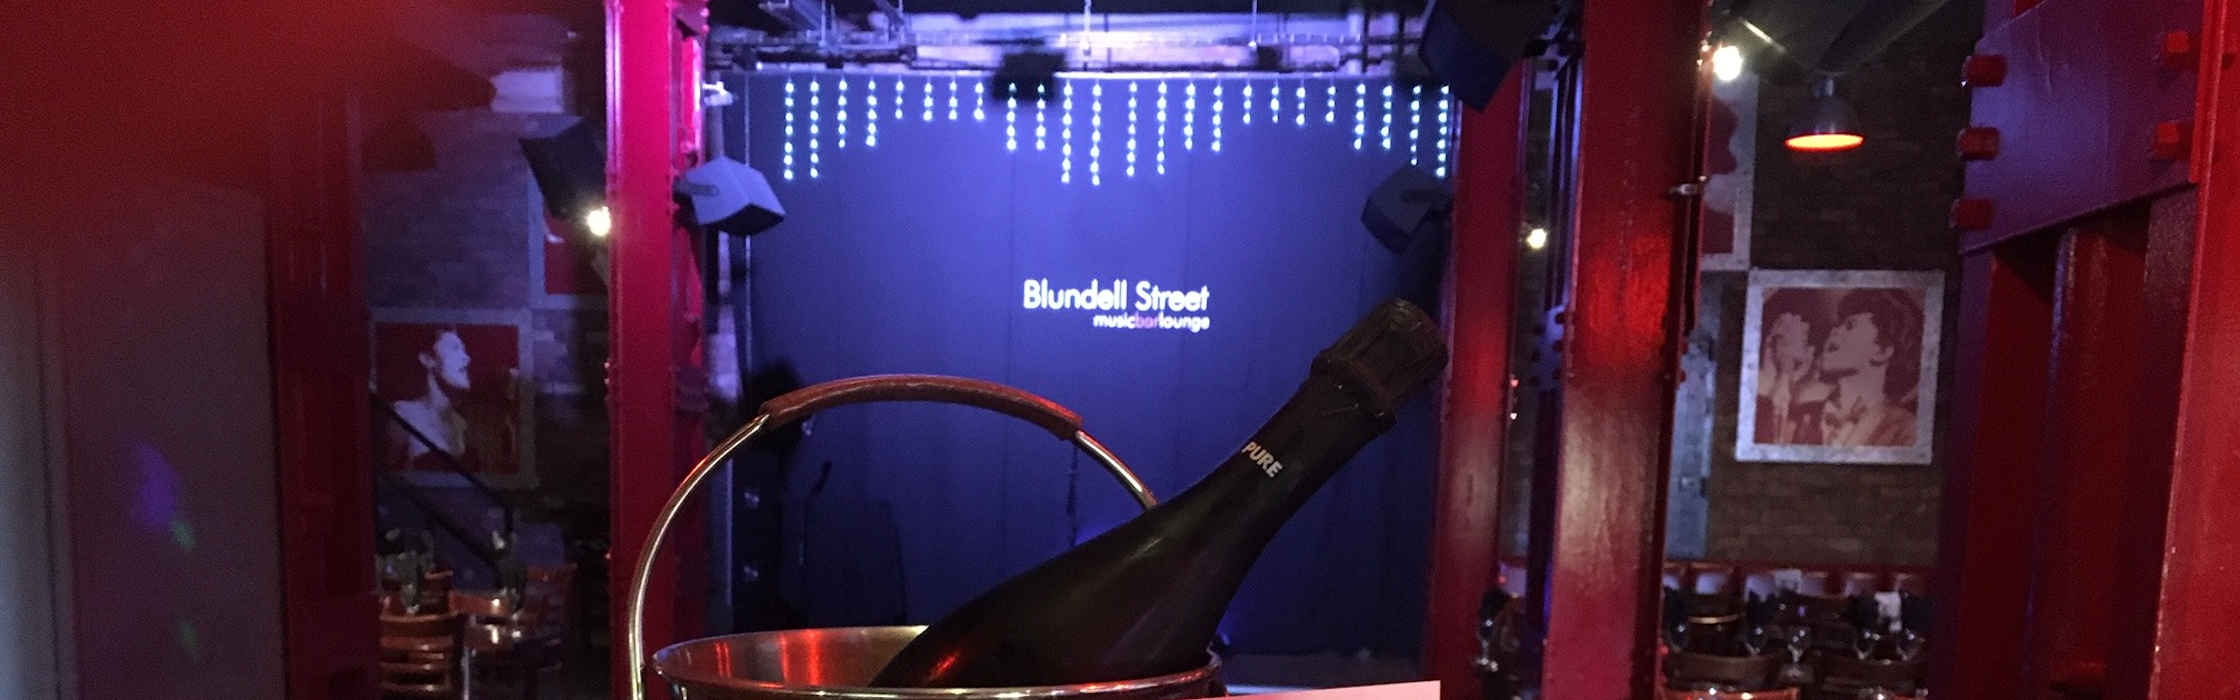 What's On at Blundell Street, Liverpool